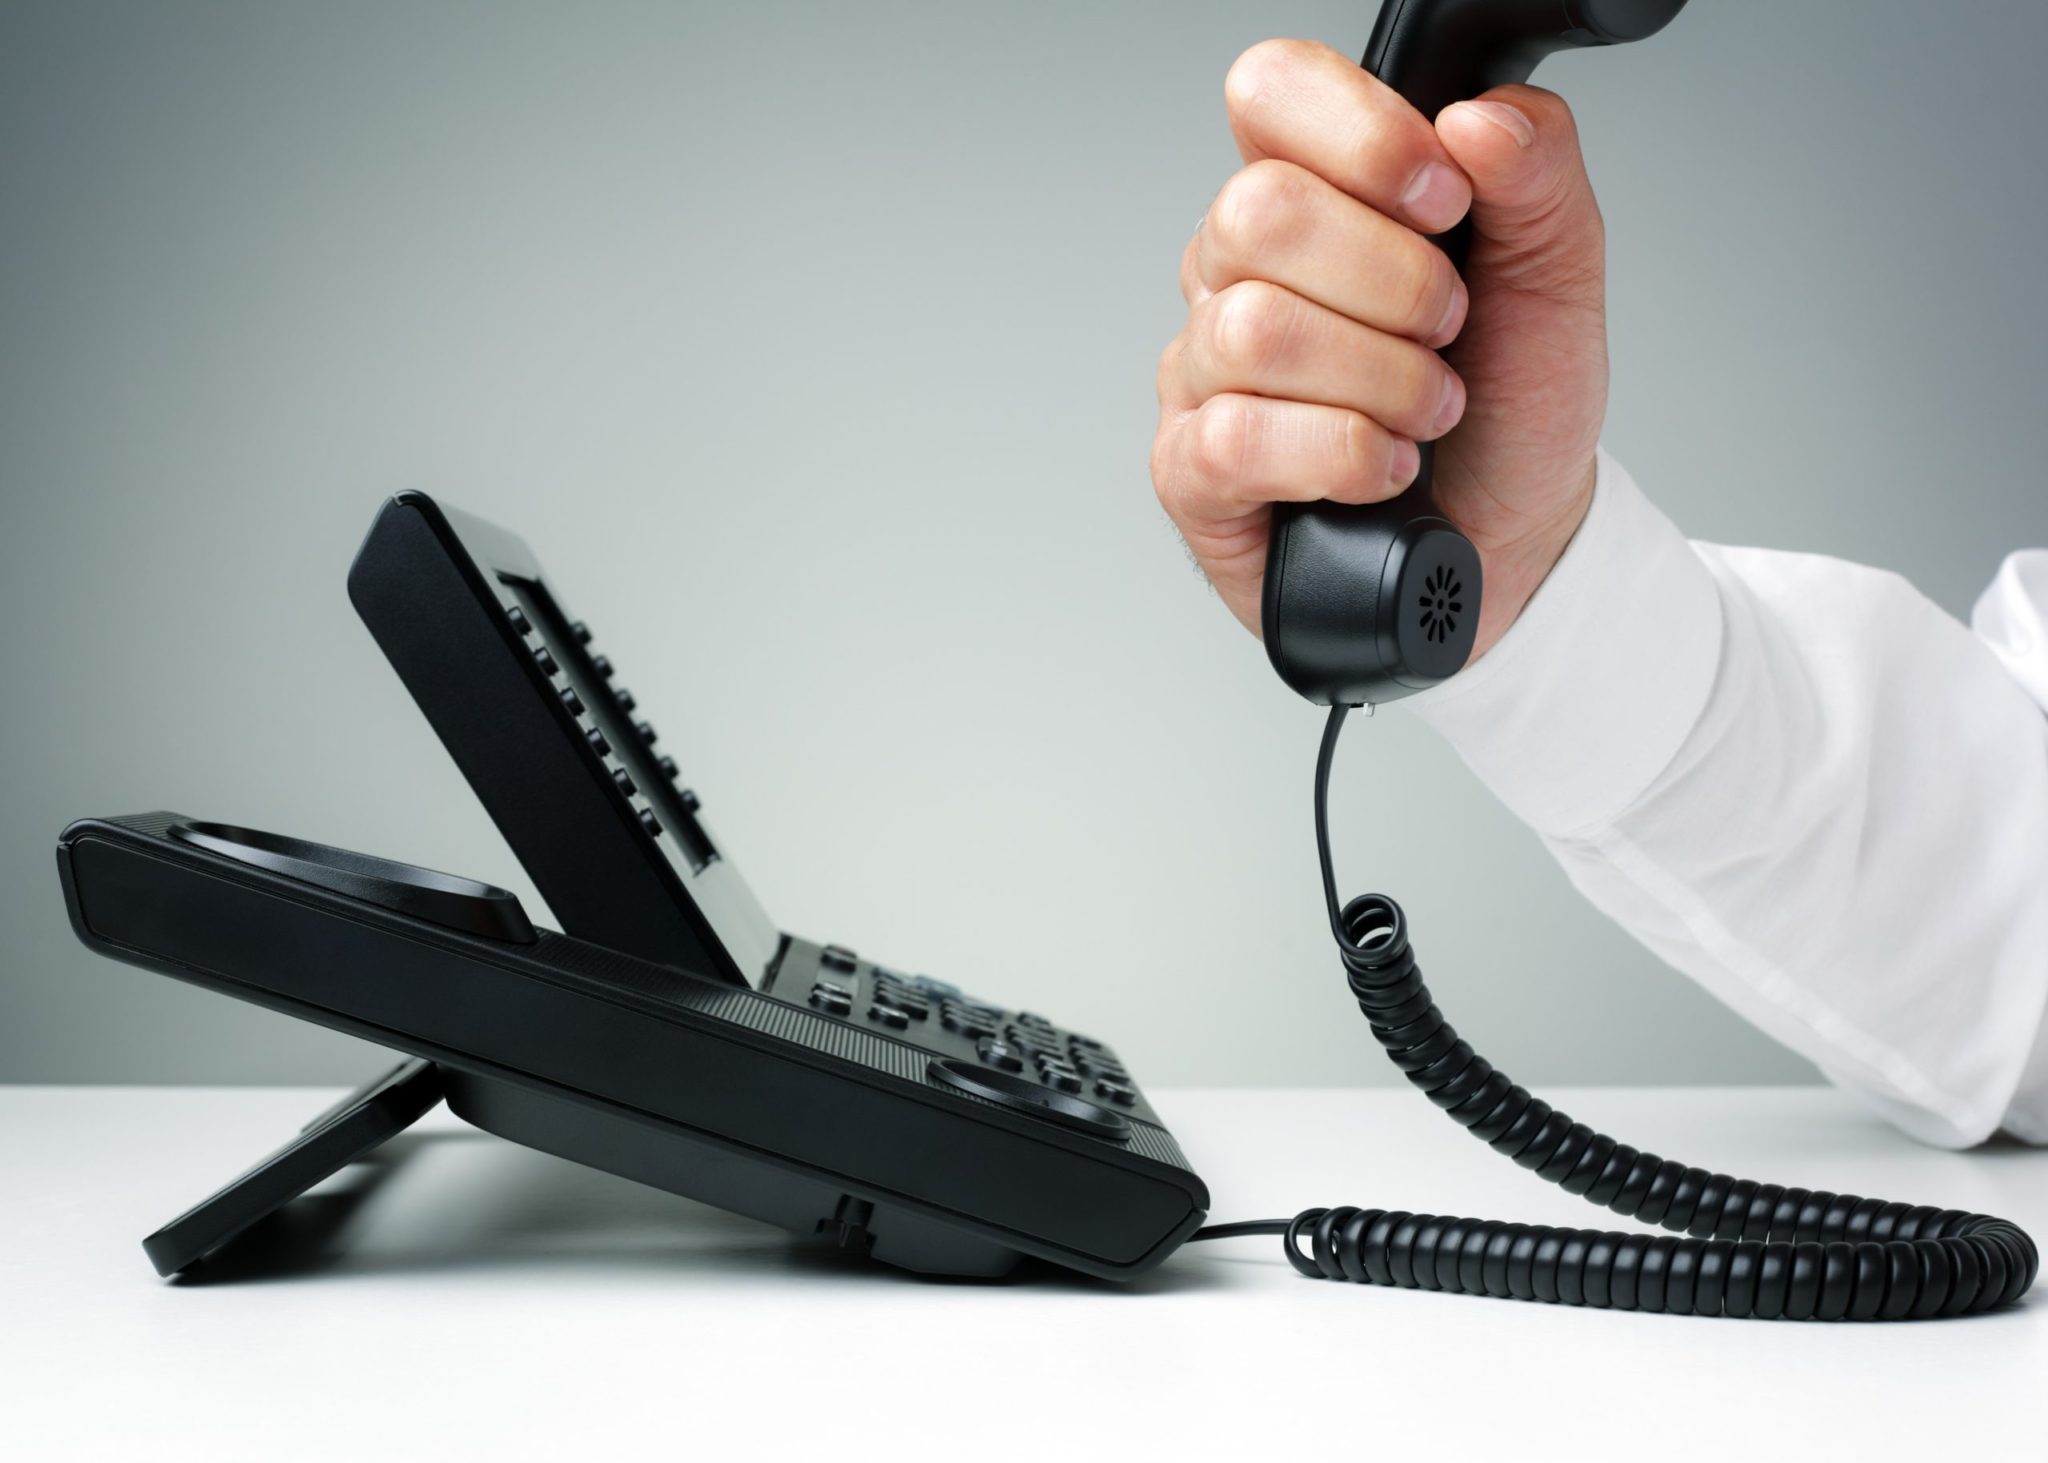 IT Services on VoIP Phone